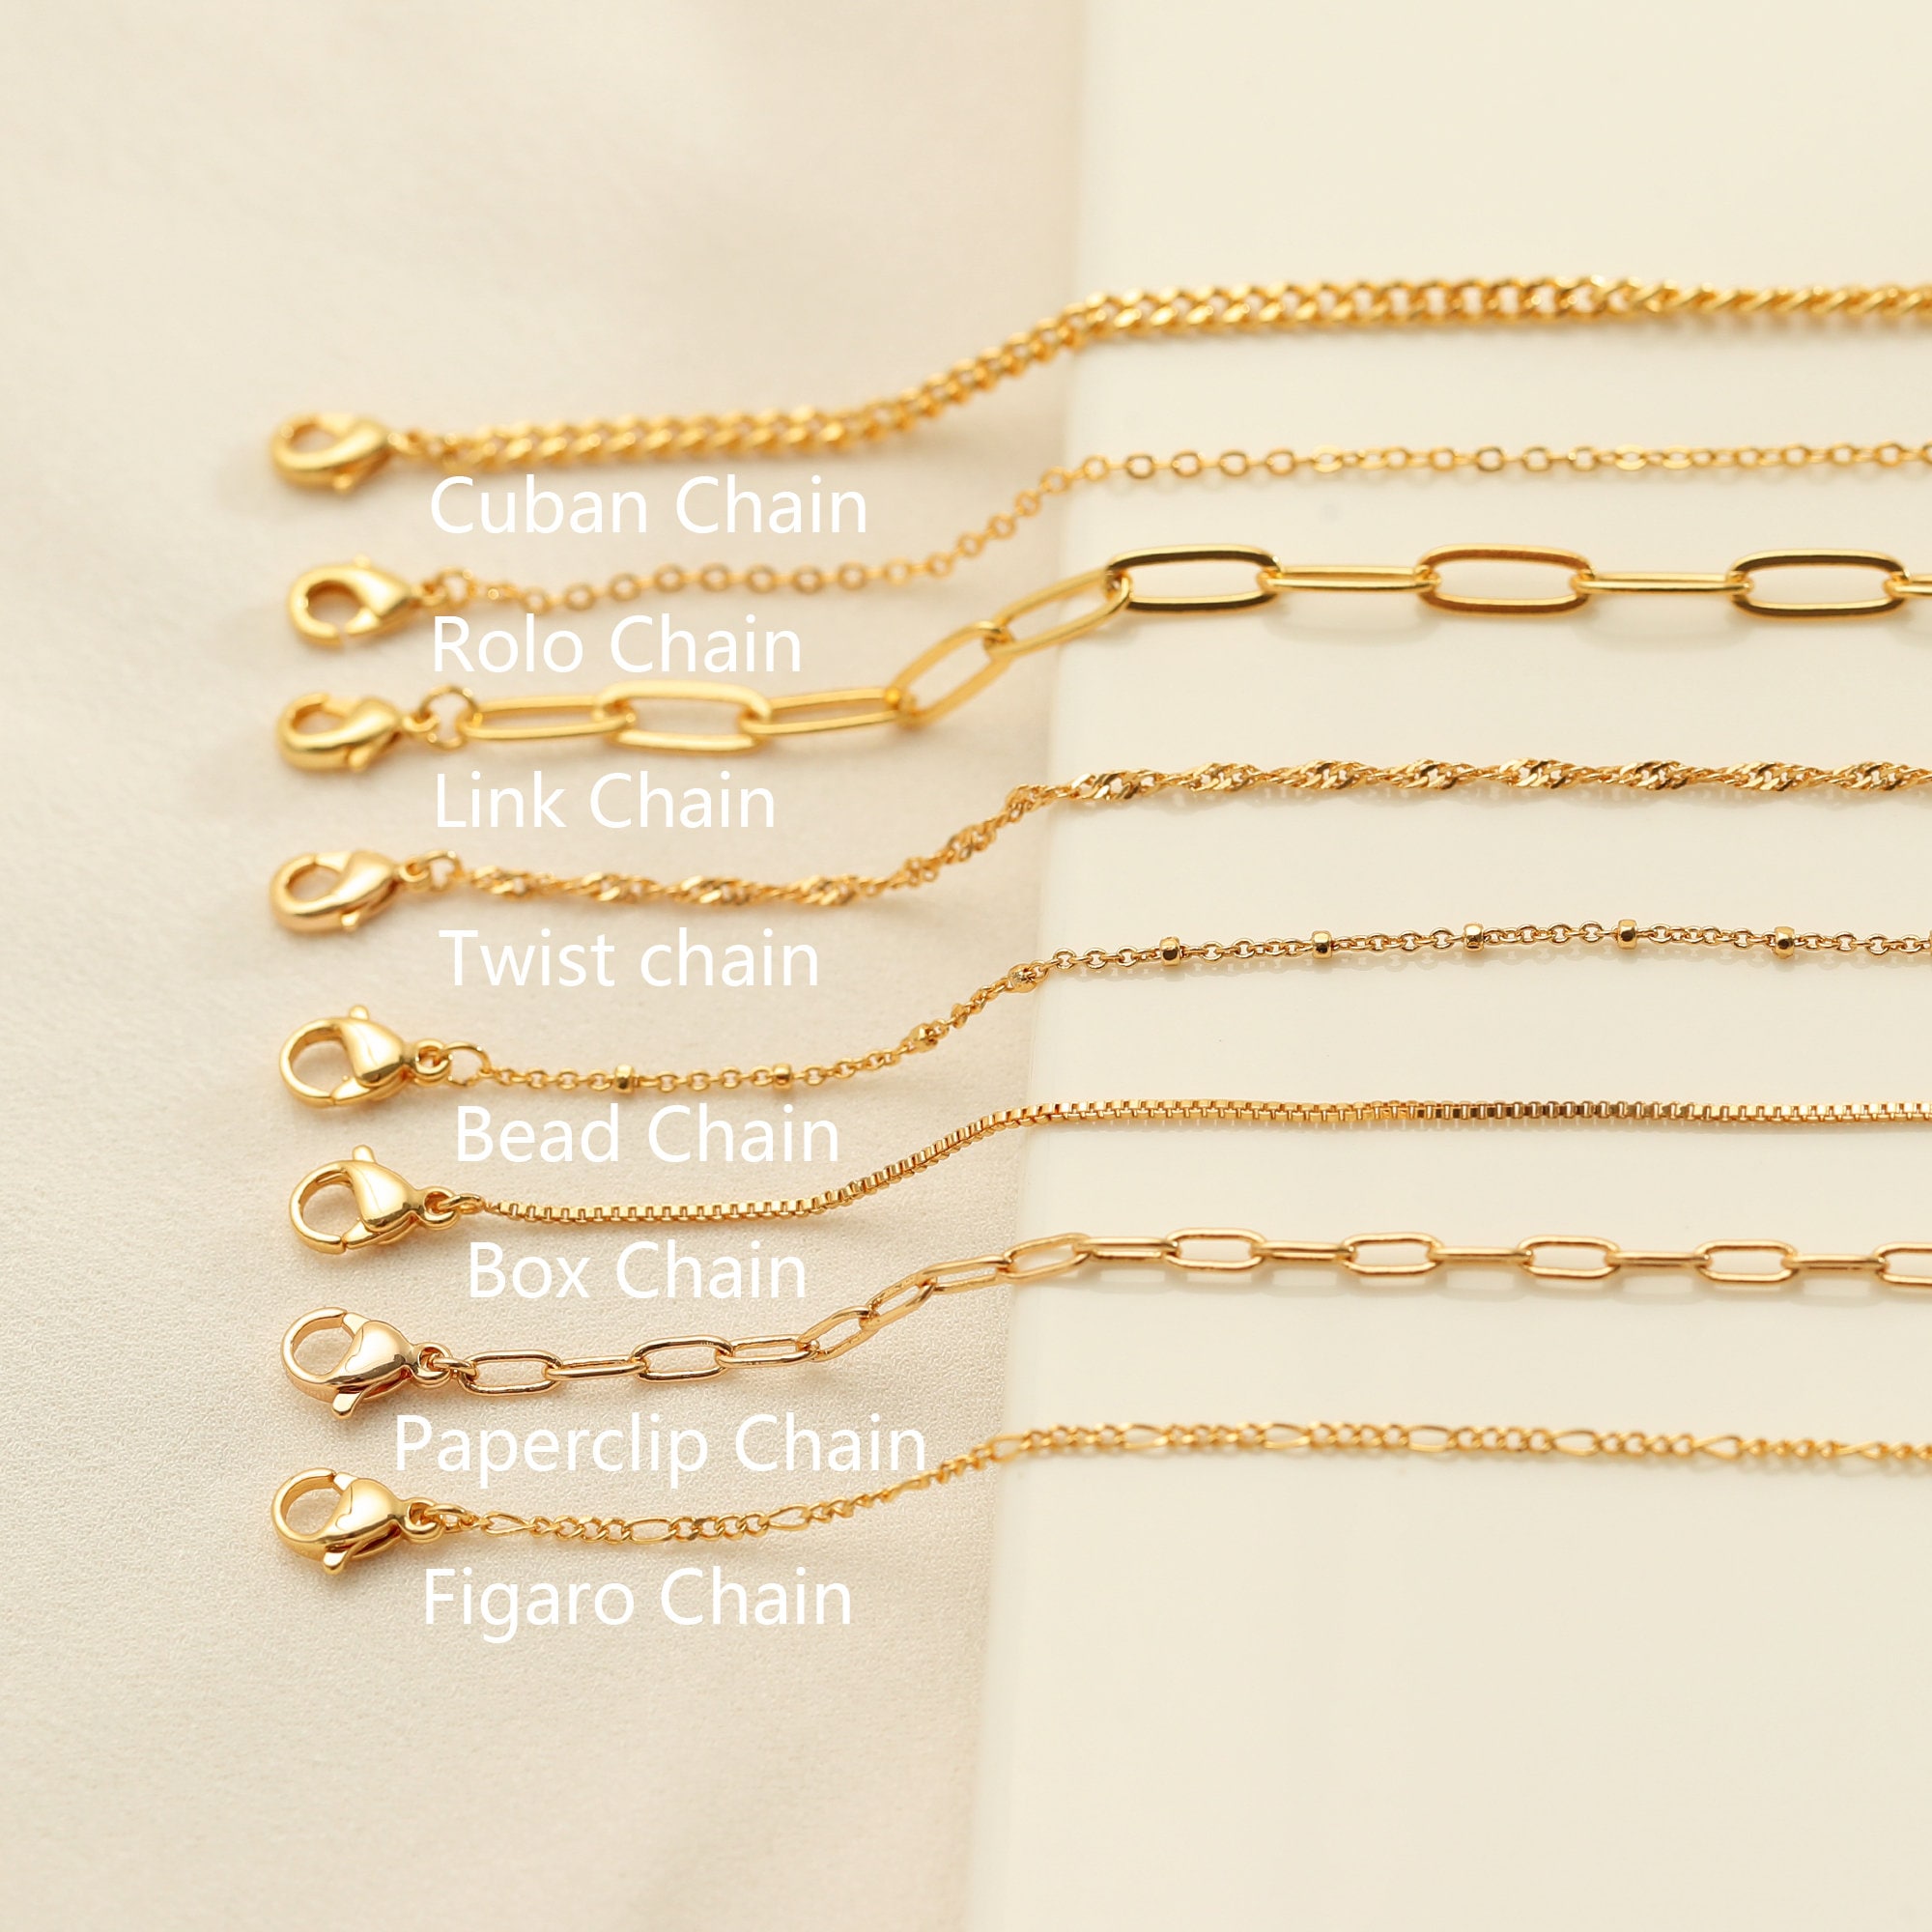 Gold Filled Chain - 16 inch 14/20 GF Necklace - 1.2 mm Curb Neck Chain with Spring Ring - Bright Finish Brand New Wholesale Jewelry Supply